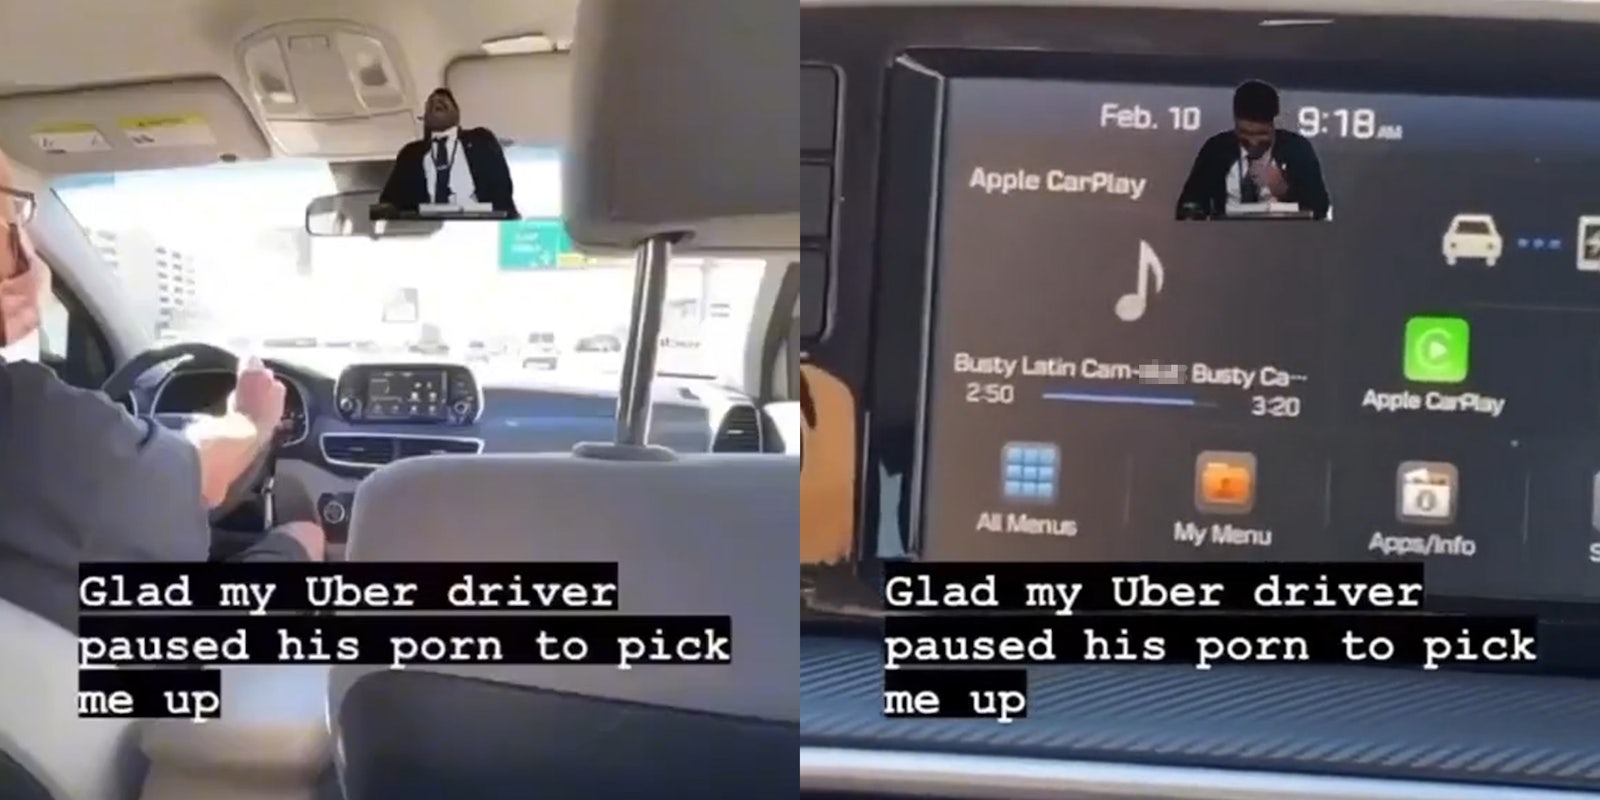 uber driver (l) car dash showing 'Busty Latin Cam-slut' track title (r) both with caption 'Glad my Uber driver paused his porn to pick me up'